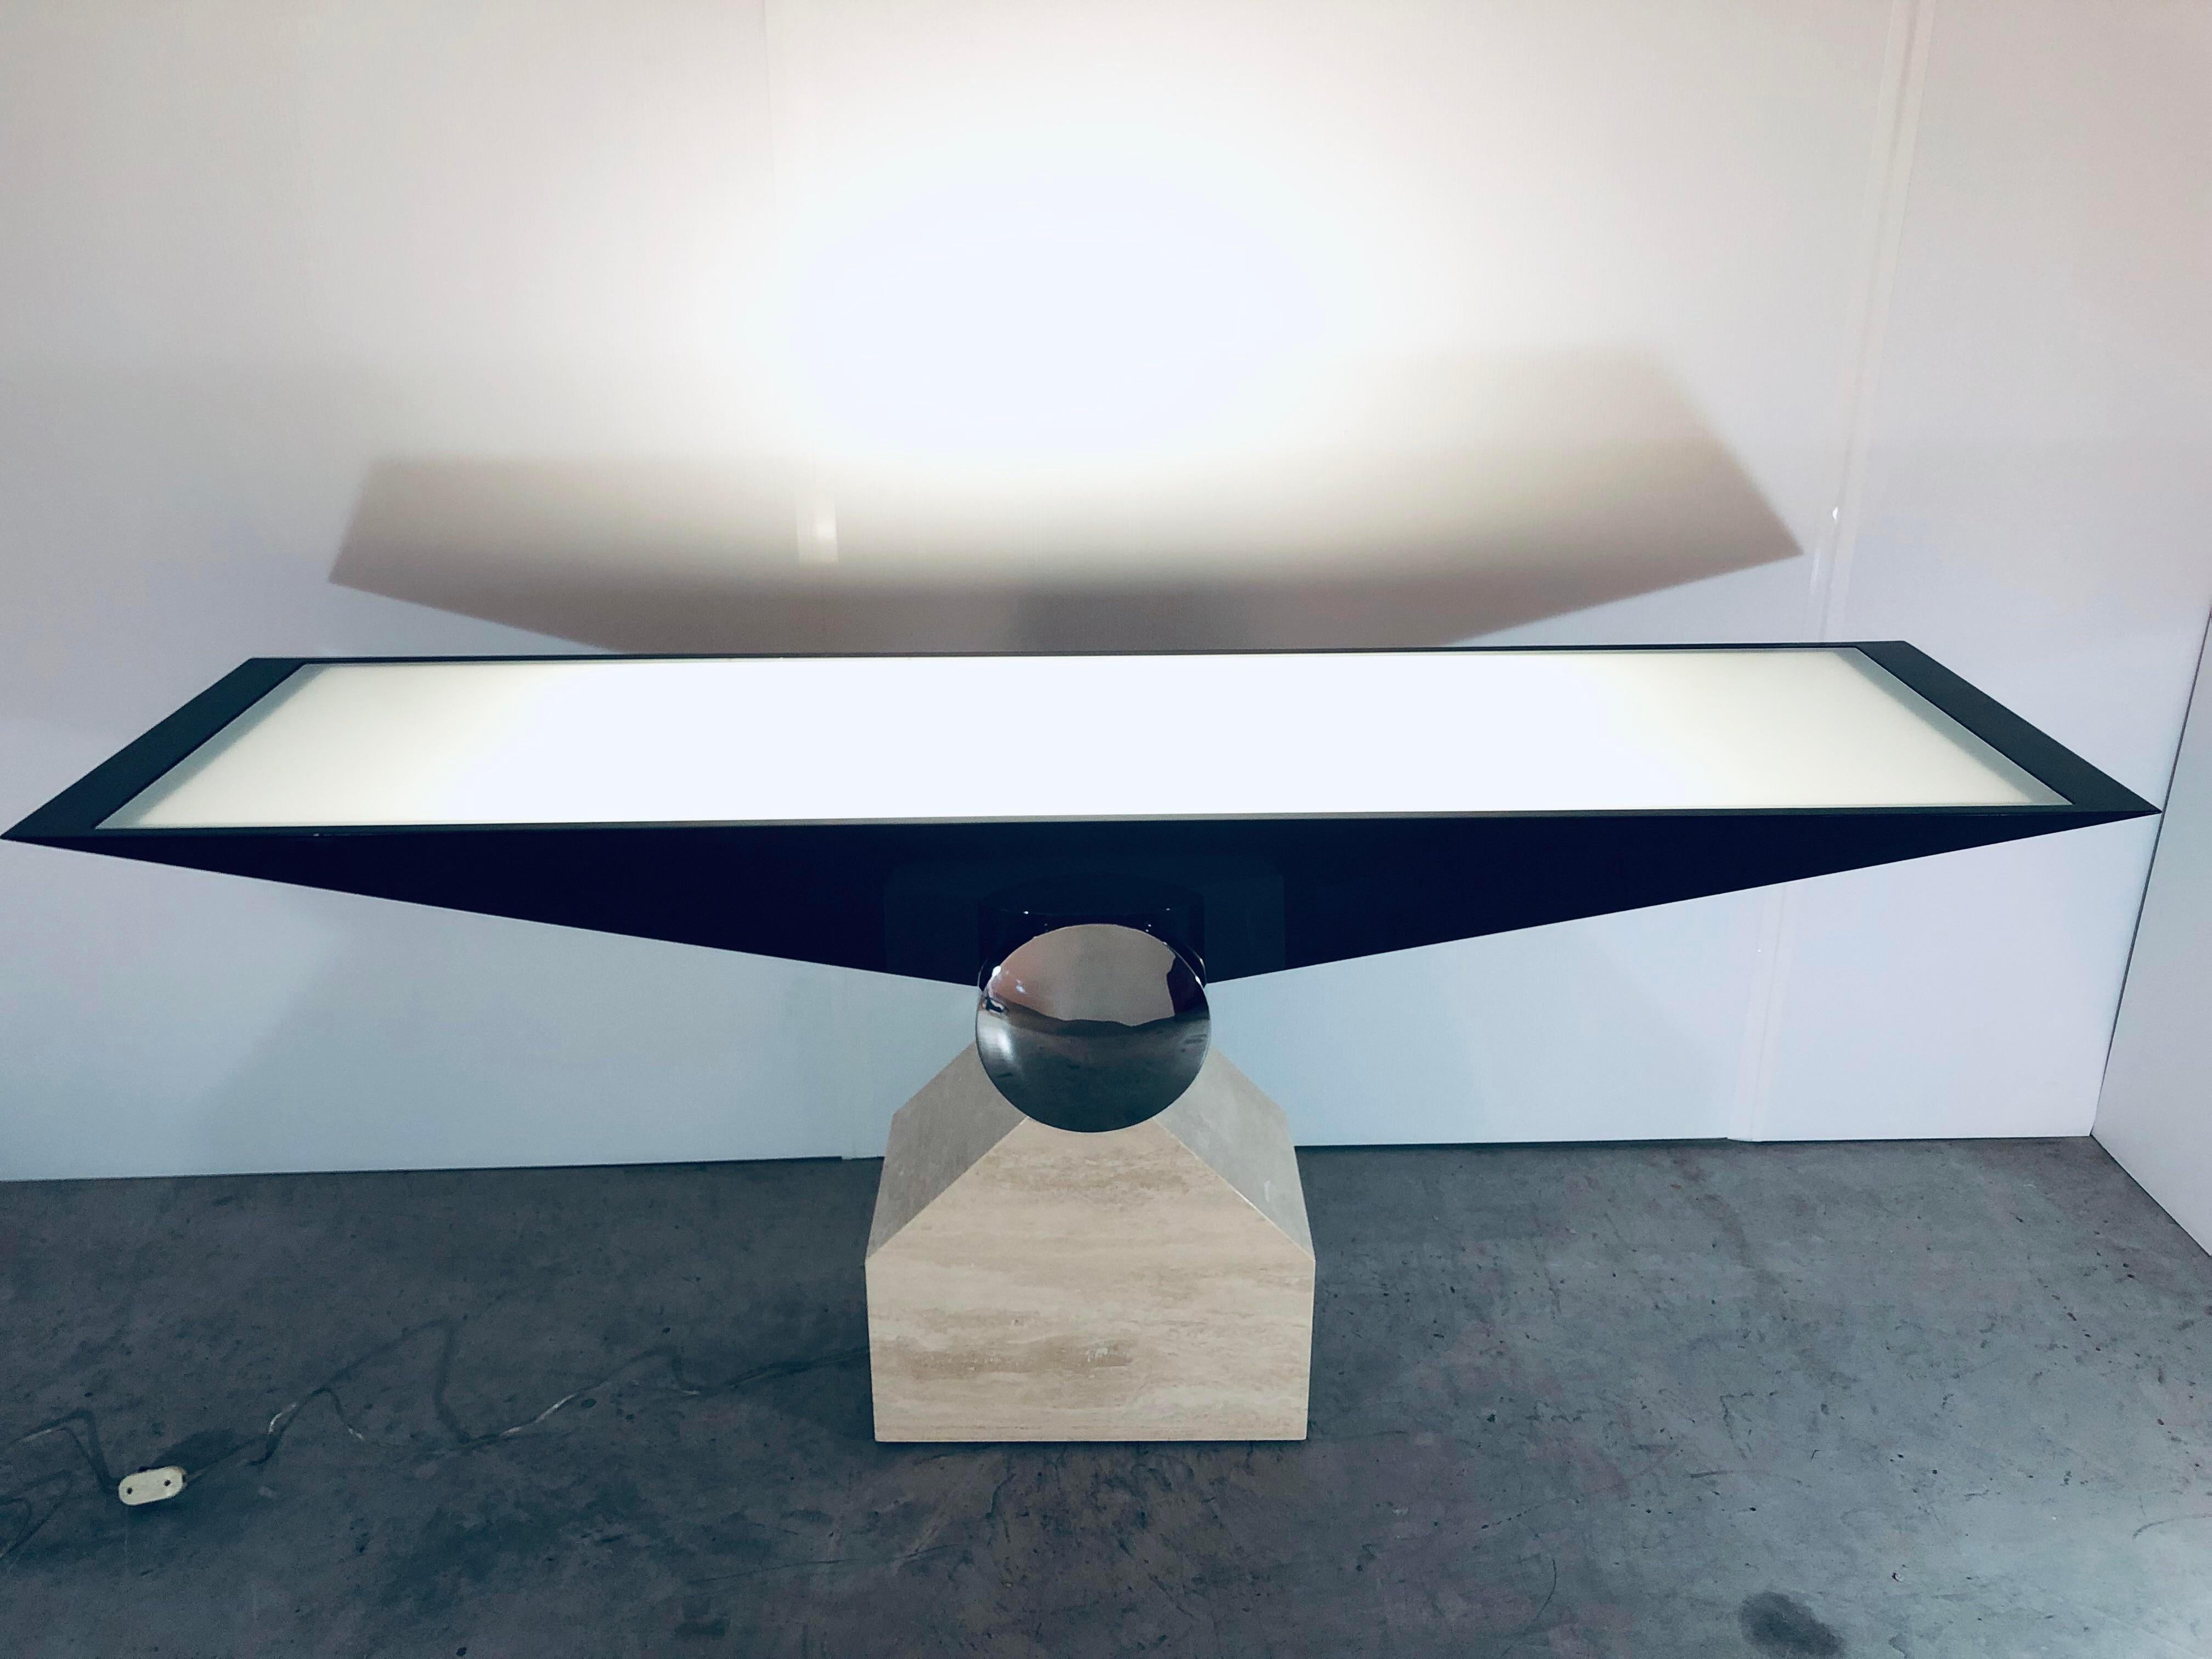 Rare J. Wade Beam designed Postmodern console table for Brueton. The inverted pyramid top is black lacquered wood with a sandblasted glass inset top which sits on top of a stainless steel cylinder connected to a travertine base. An expertly crafted